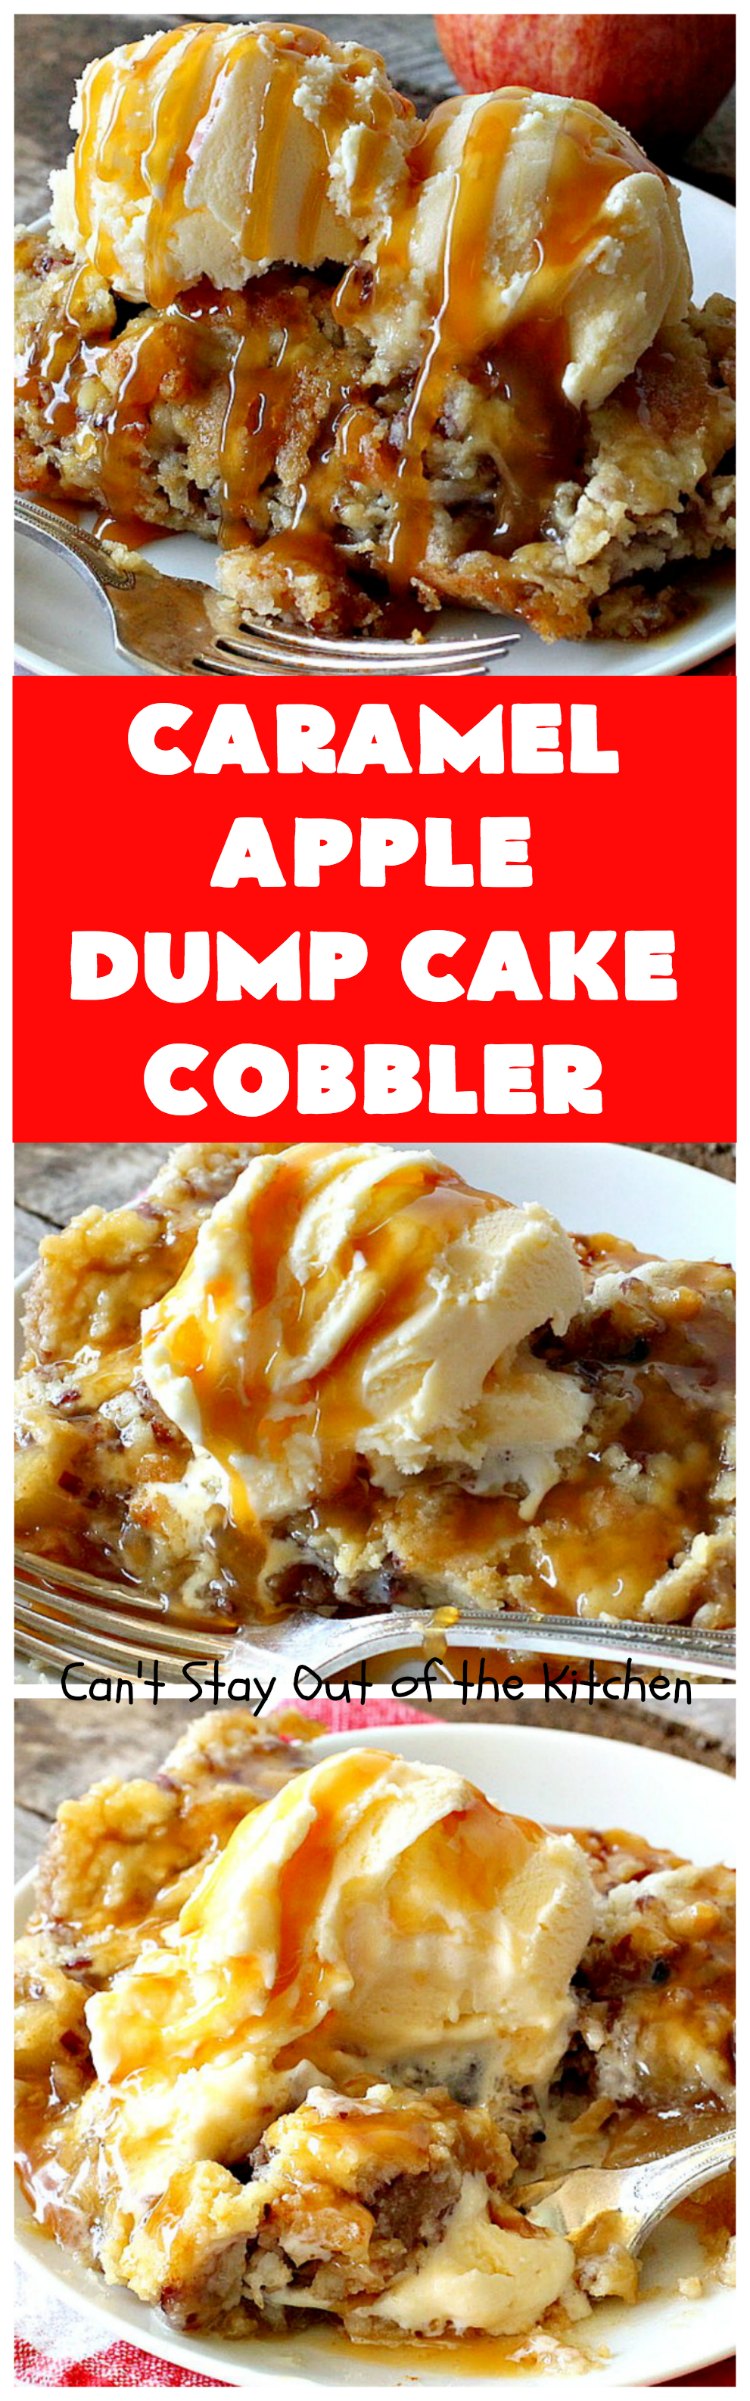 Caramel Apple Dump Cake Cobbler | Can't Stay Out of the Kitchen